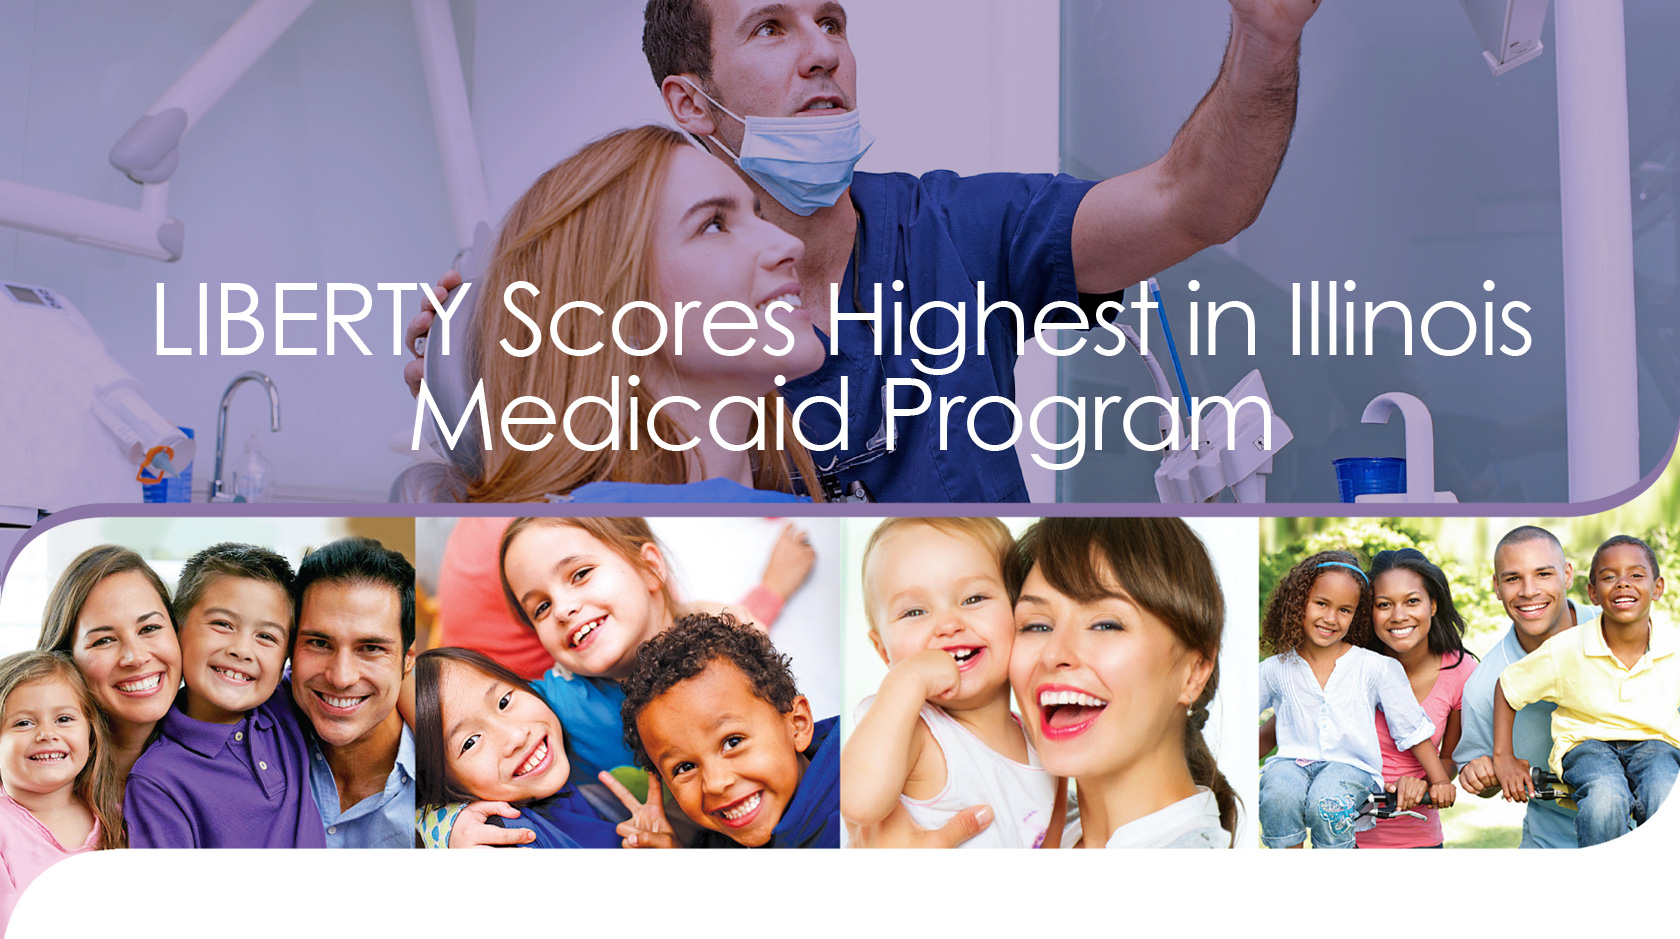 LIBERTY scores highest in IL Medicaid Program